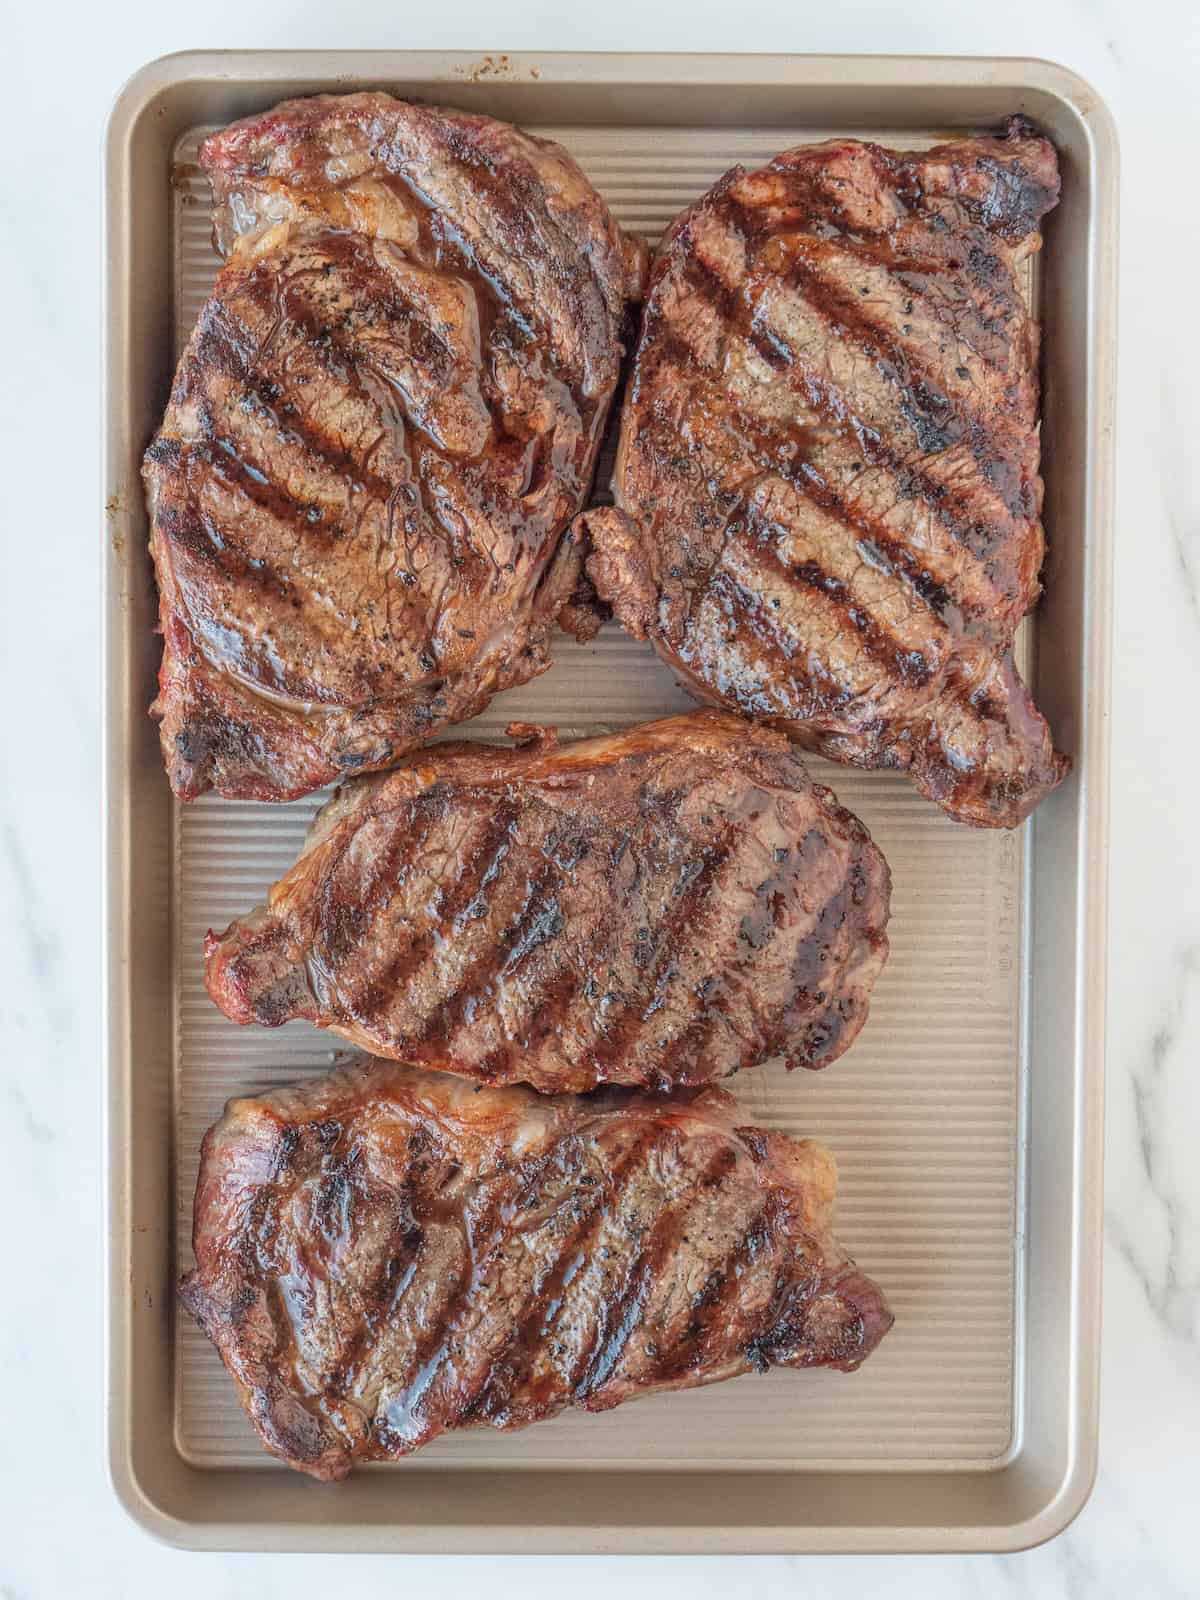 A baking sheet with four grilled rib eye steaks.